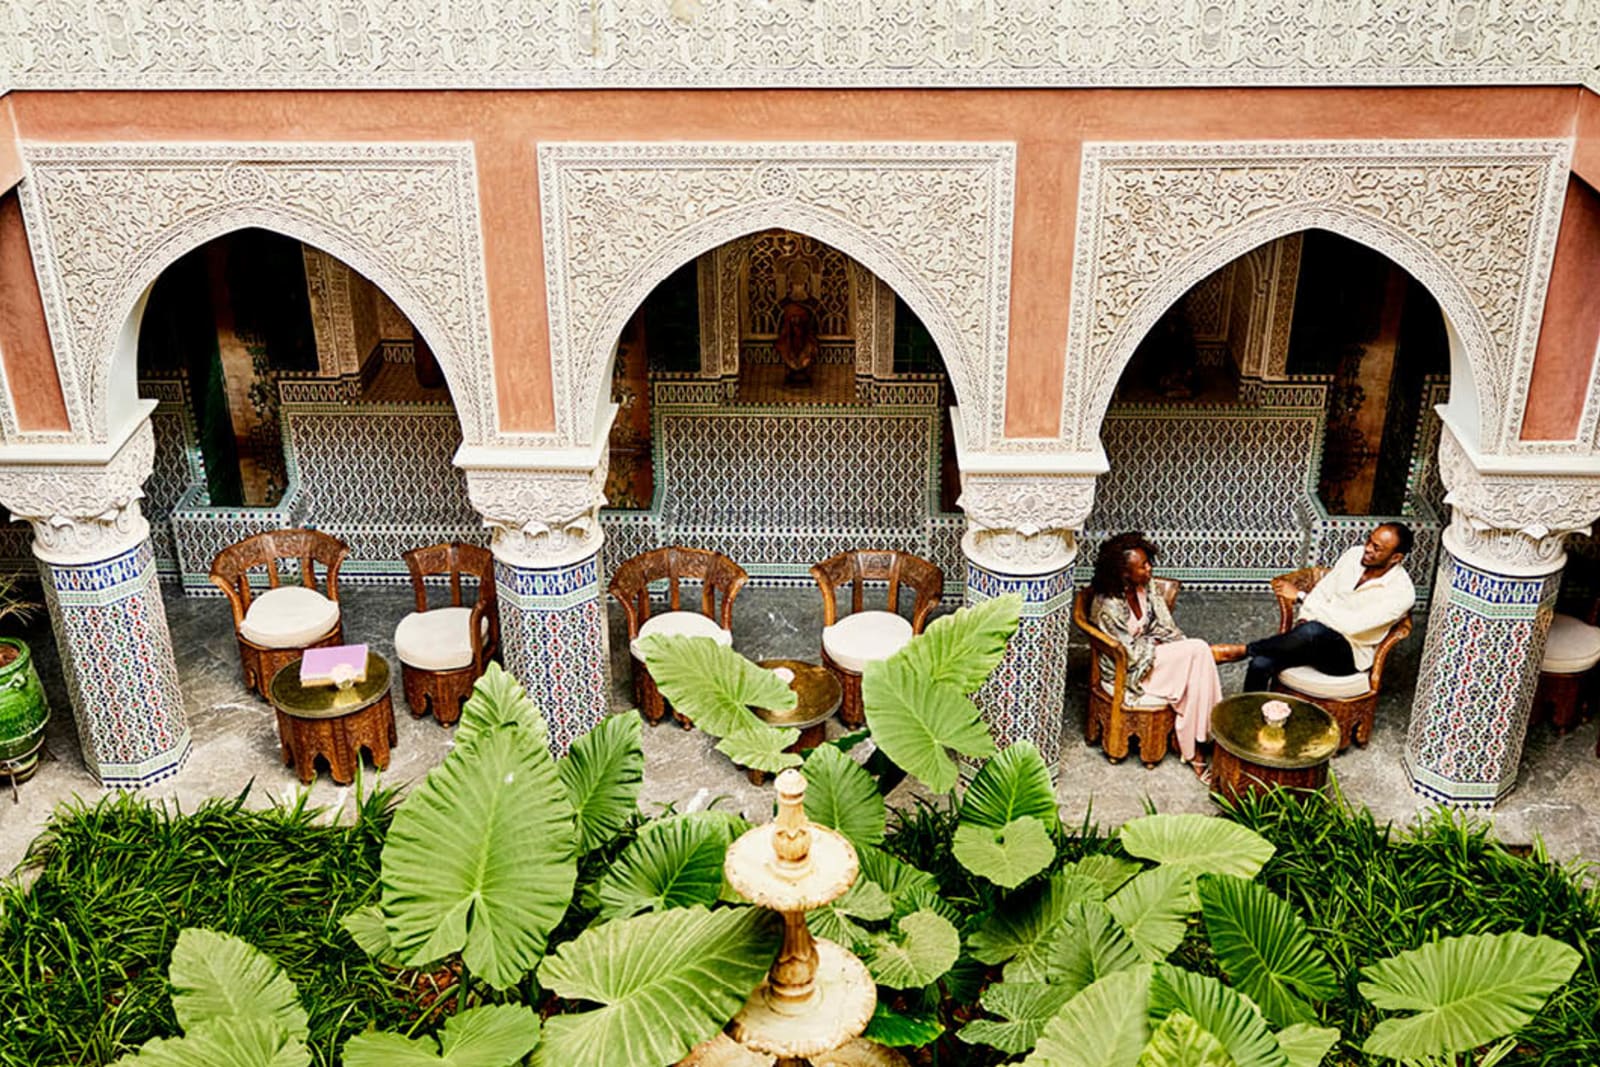 A couple at a luxury hotel in Marrakech, Morocco